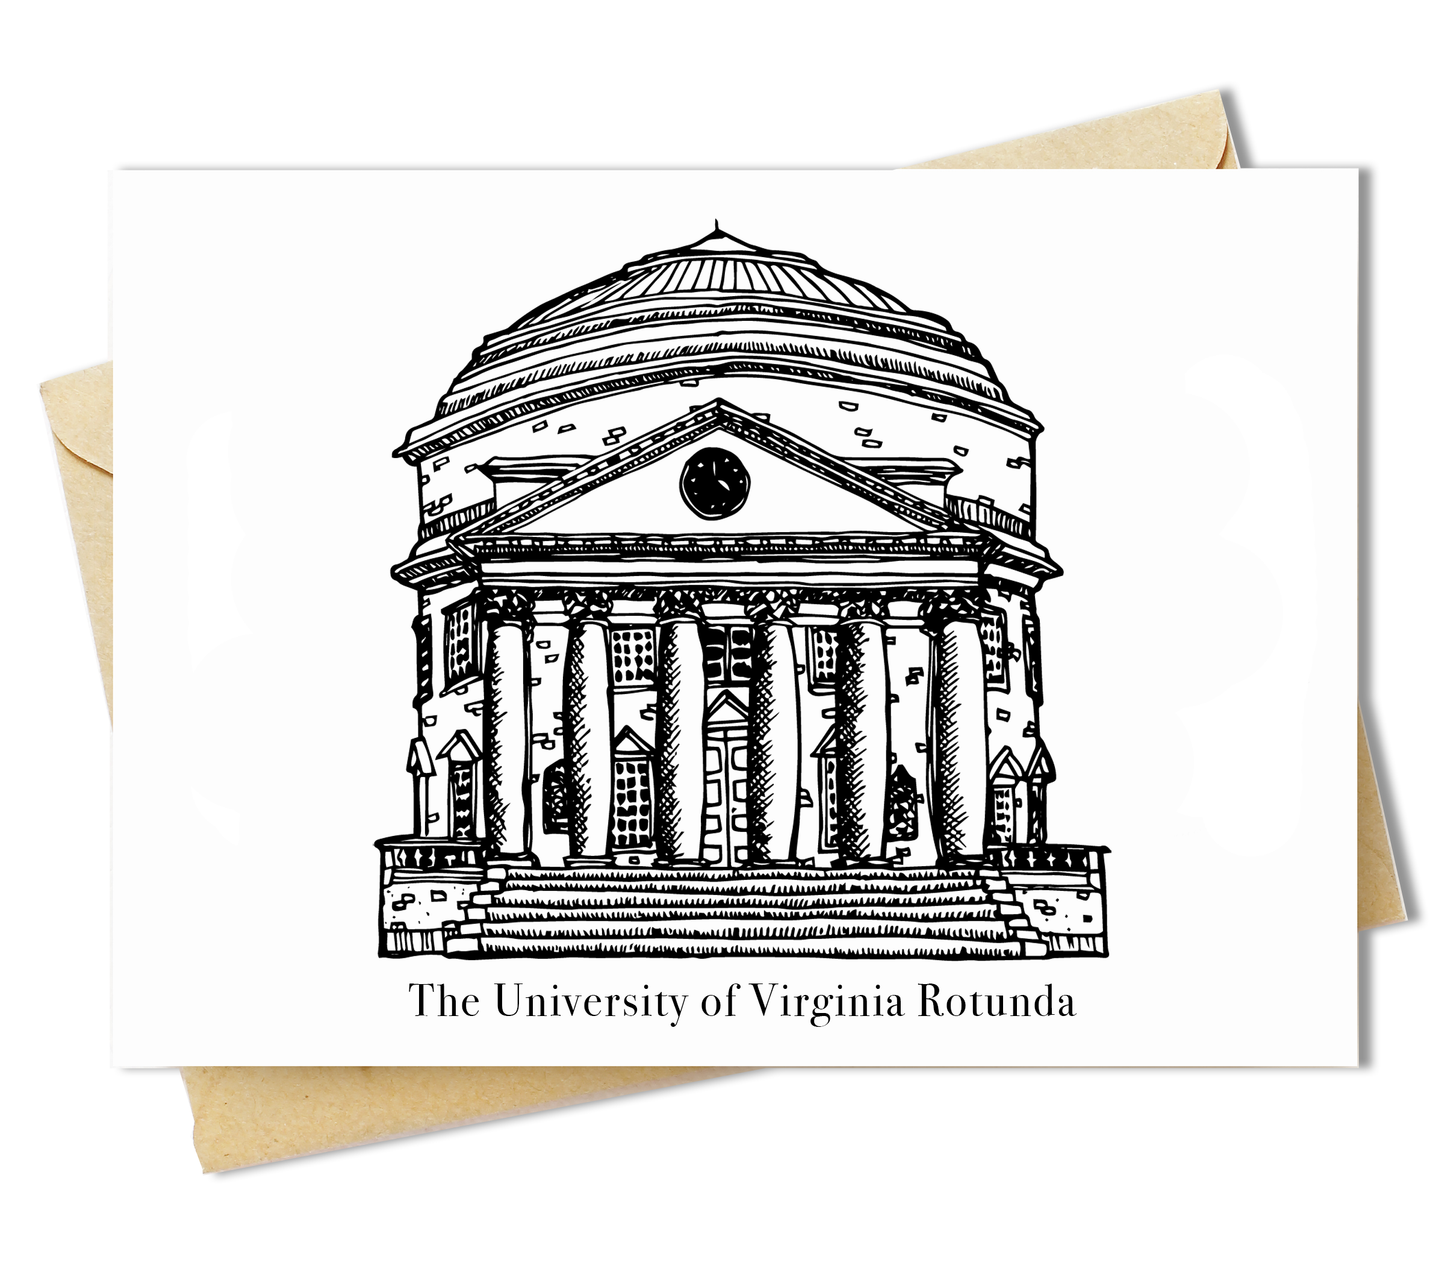 BellavanceInk: Greeting Card With A Pen & Ink Drawing Of The University Of Virginia Rotunda 5 x 7 Inches (Officially Licensed)